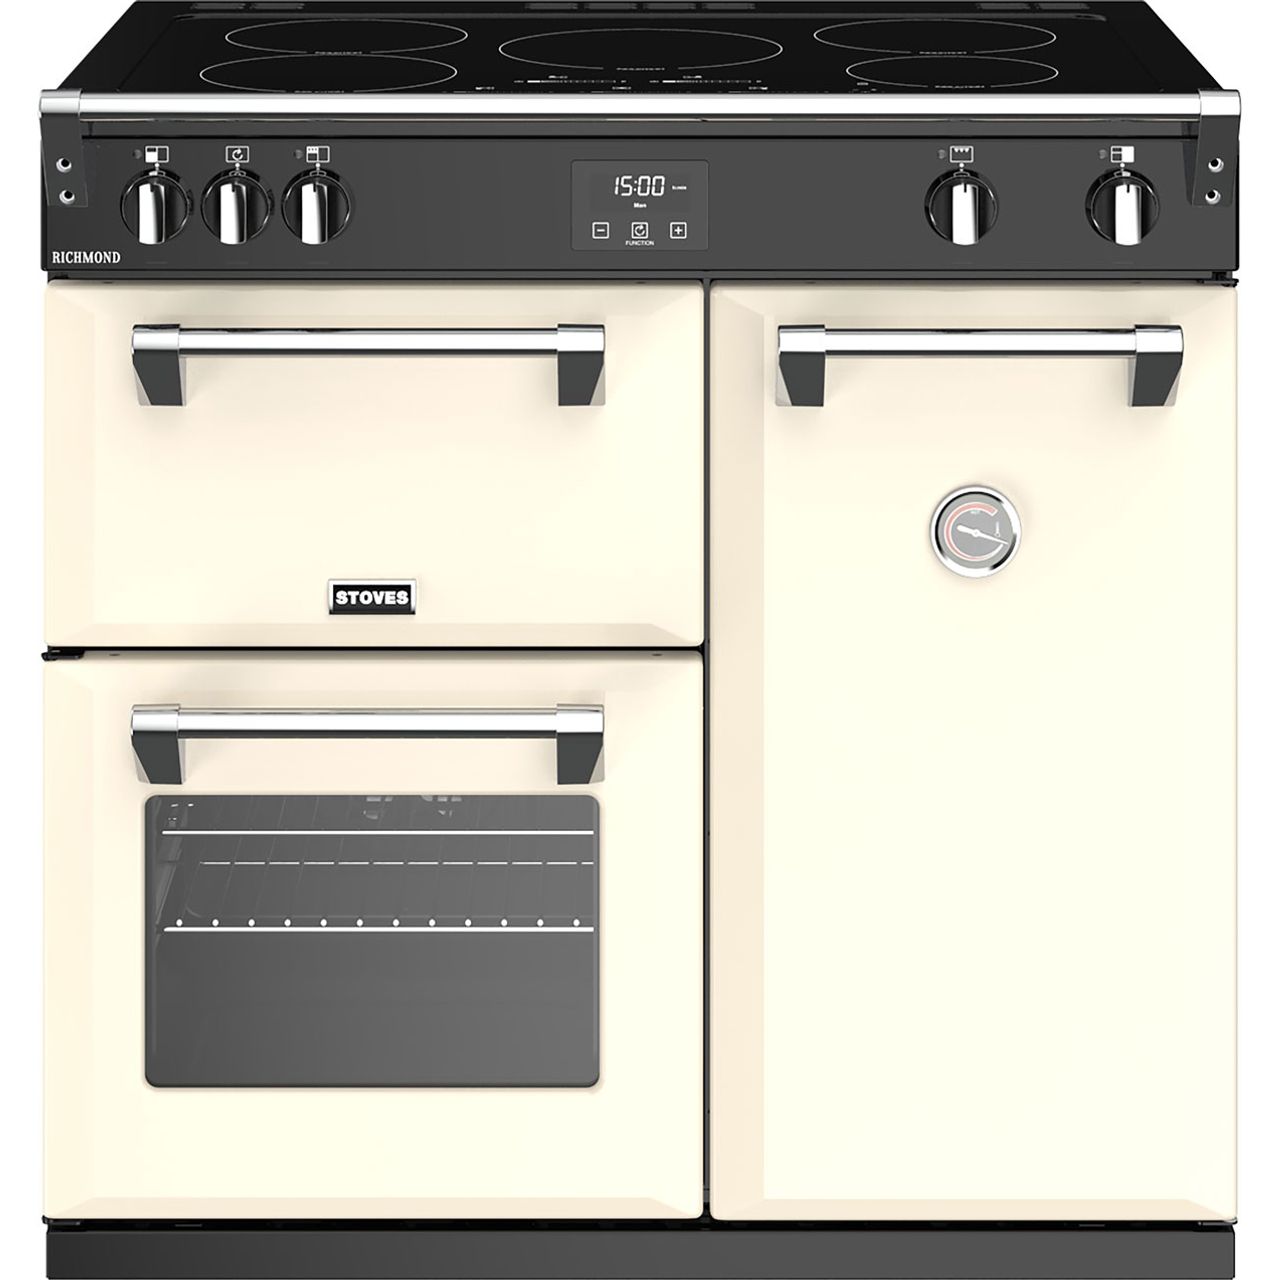 Stoves Richmond S900Ei 90cm Electric Range Cooker with Induction Hob Review